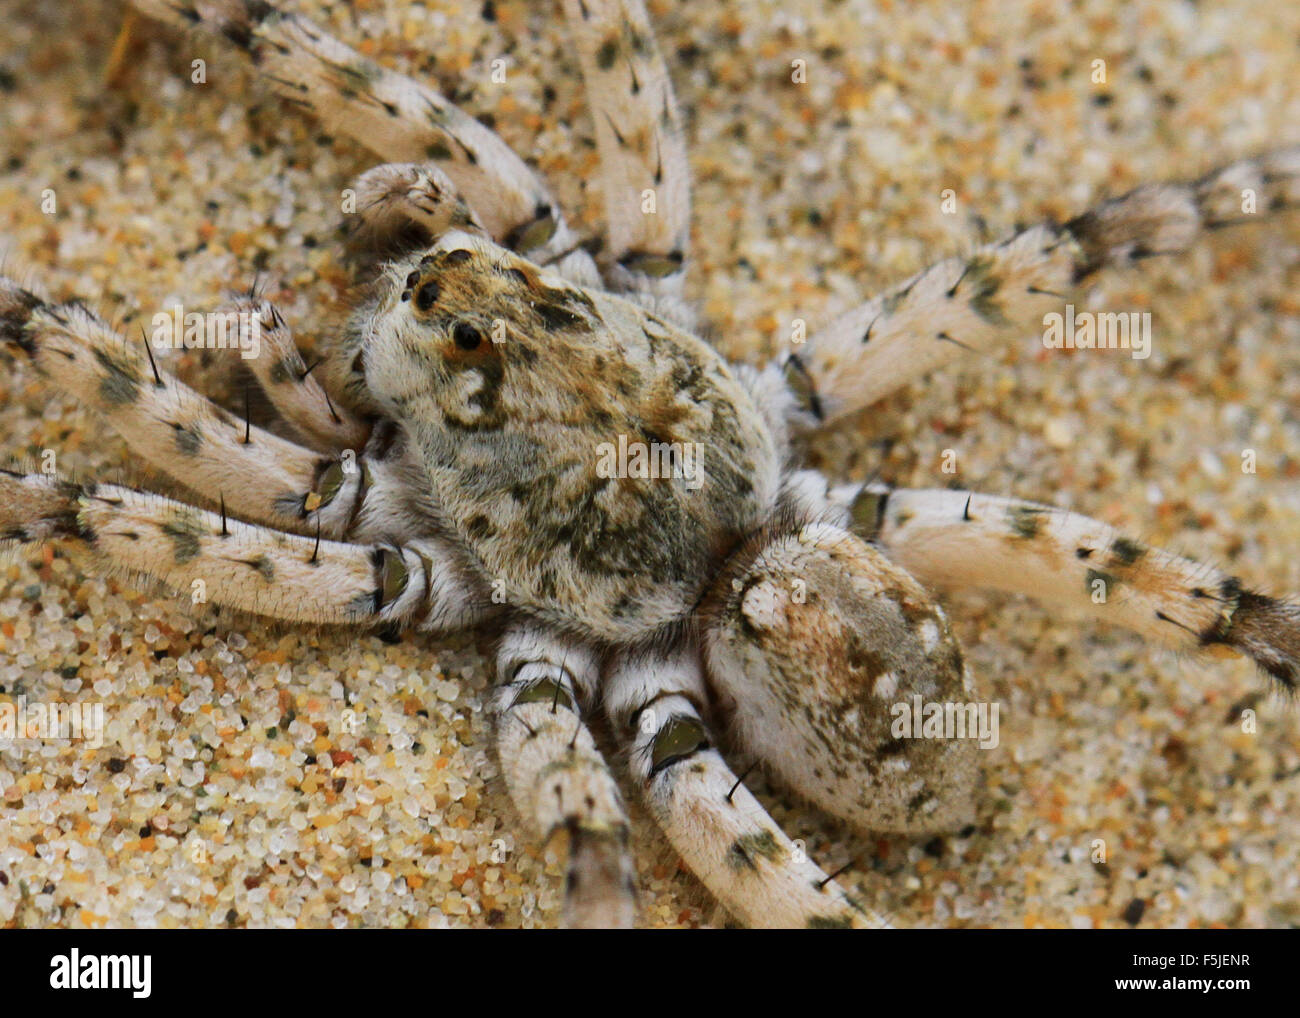 Dolomedes Tenebrosus, also known as the fishing spider or nursery web spider, on a sandy beach in Michigan Stock Photo